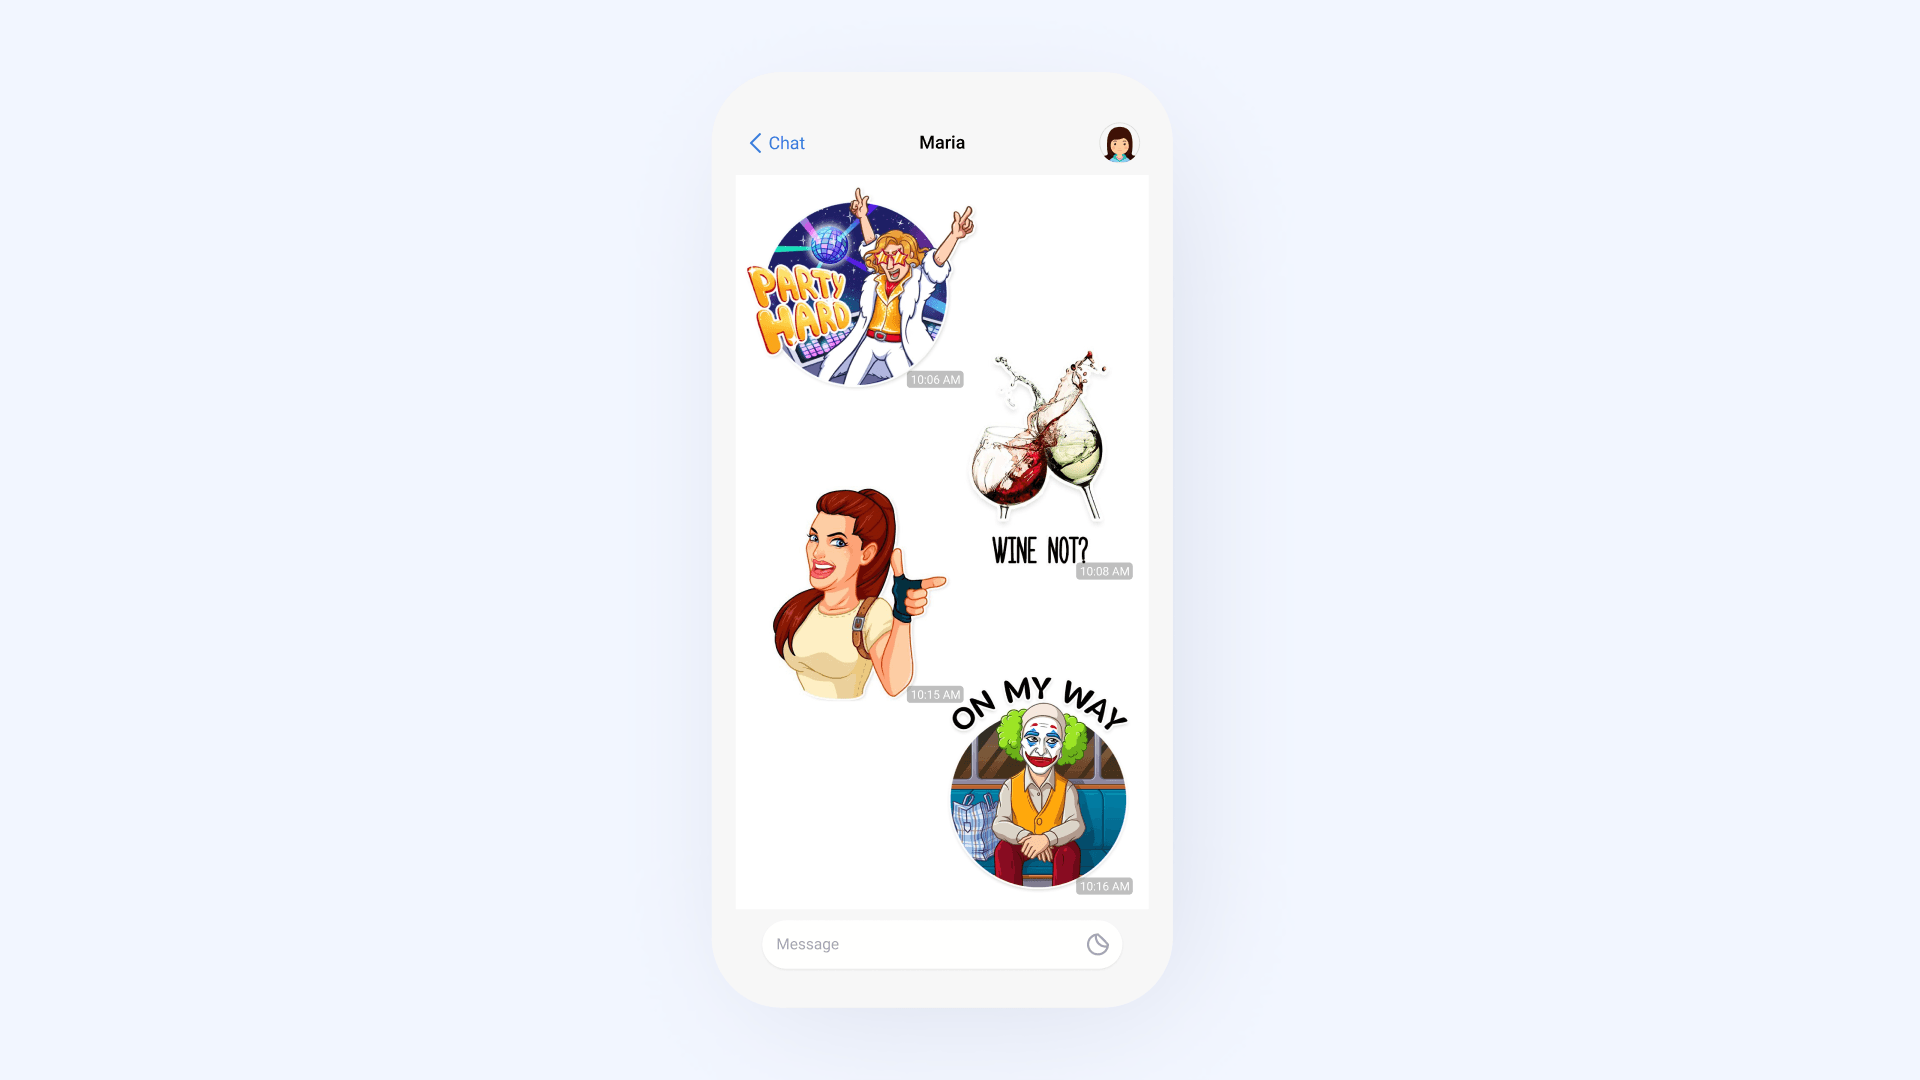 Stickers in messages